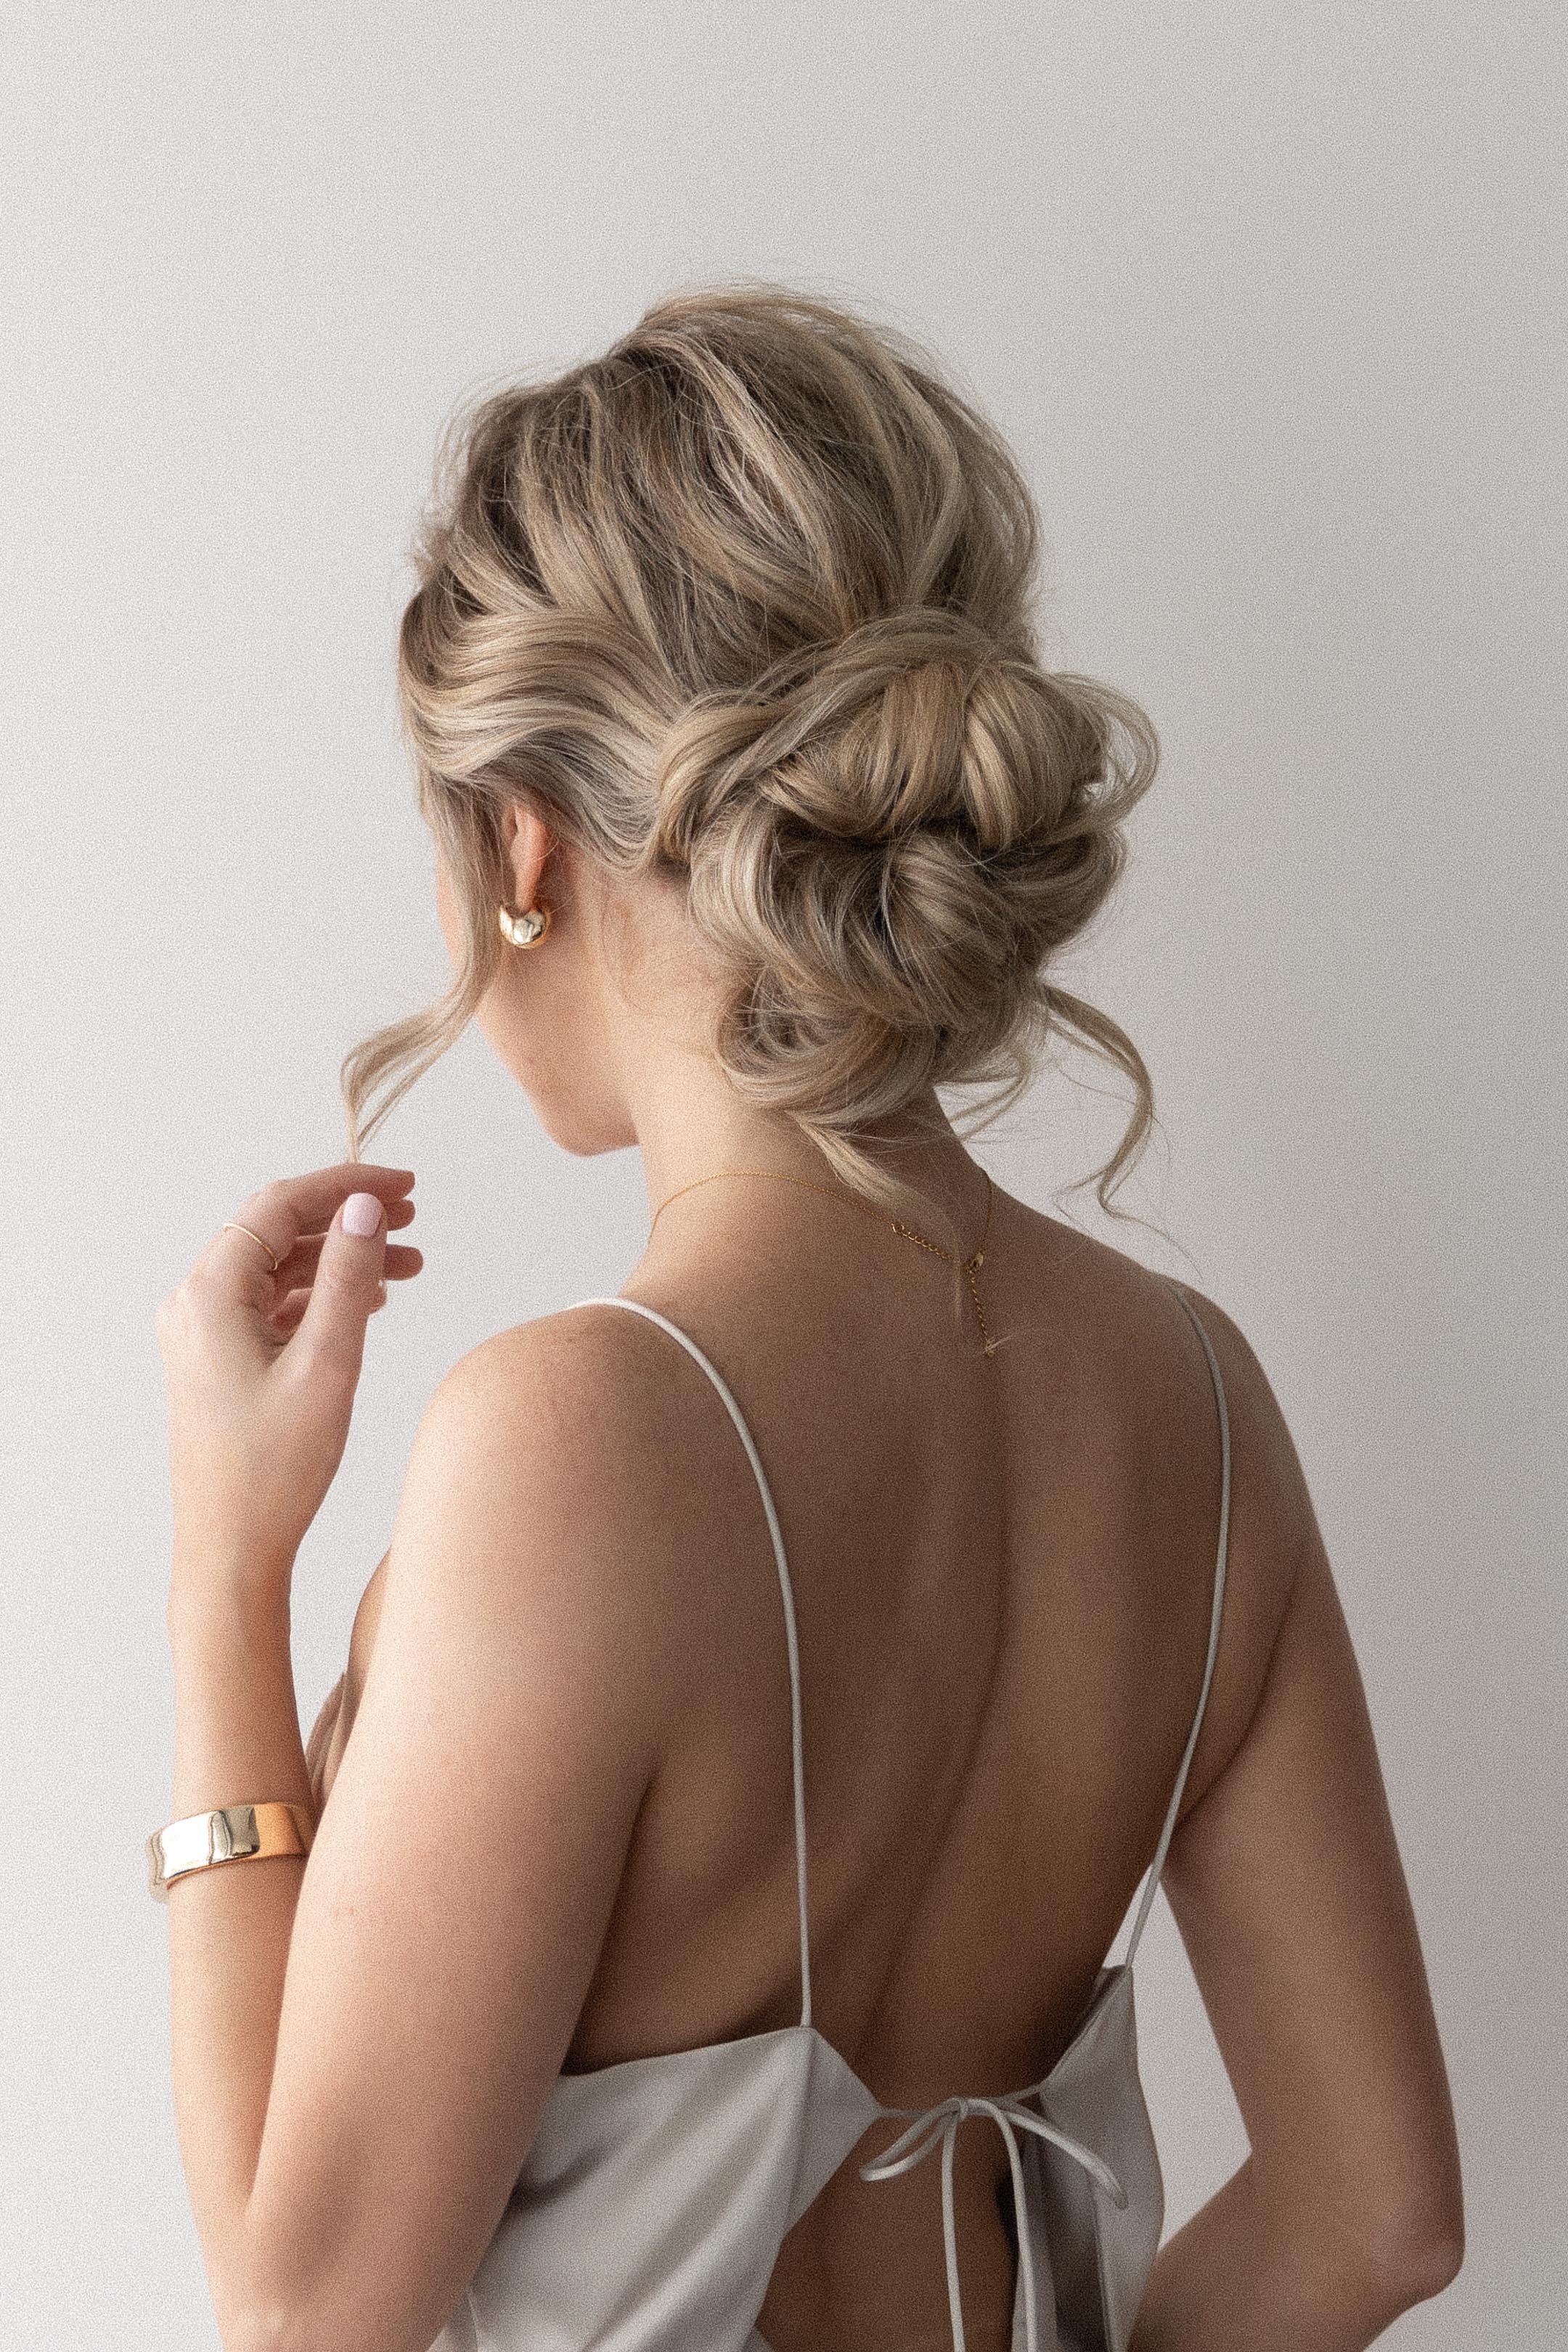 Go-To Favourite Messy Bun Hairstyles In These Easy Steps | Femina.in